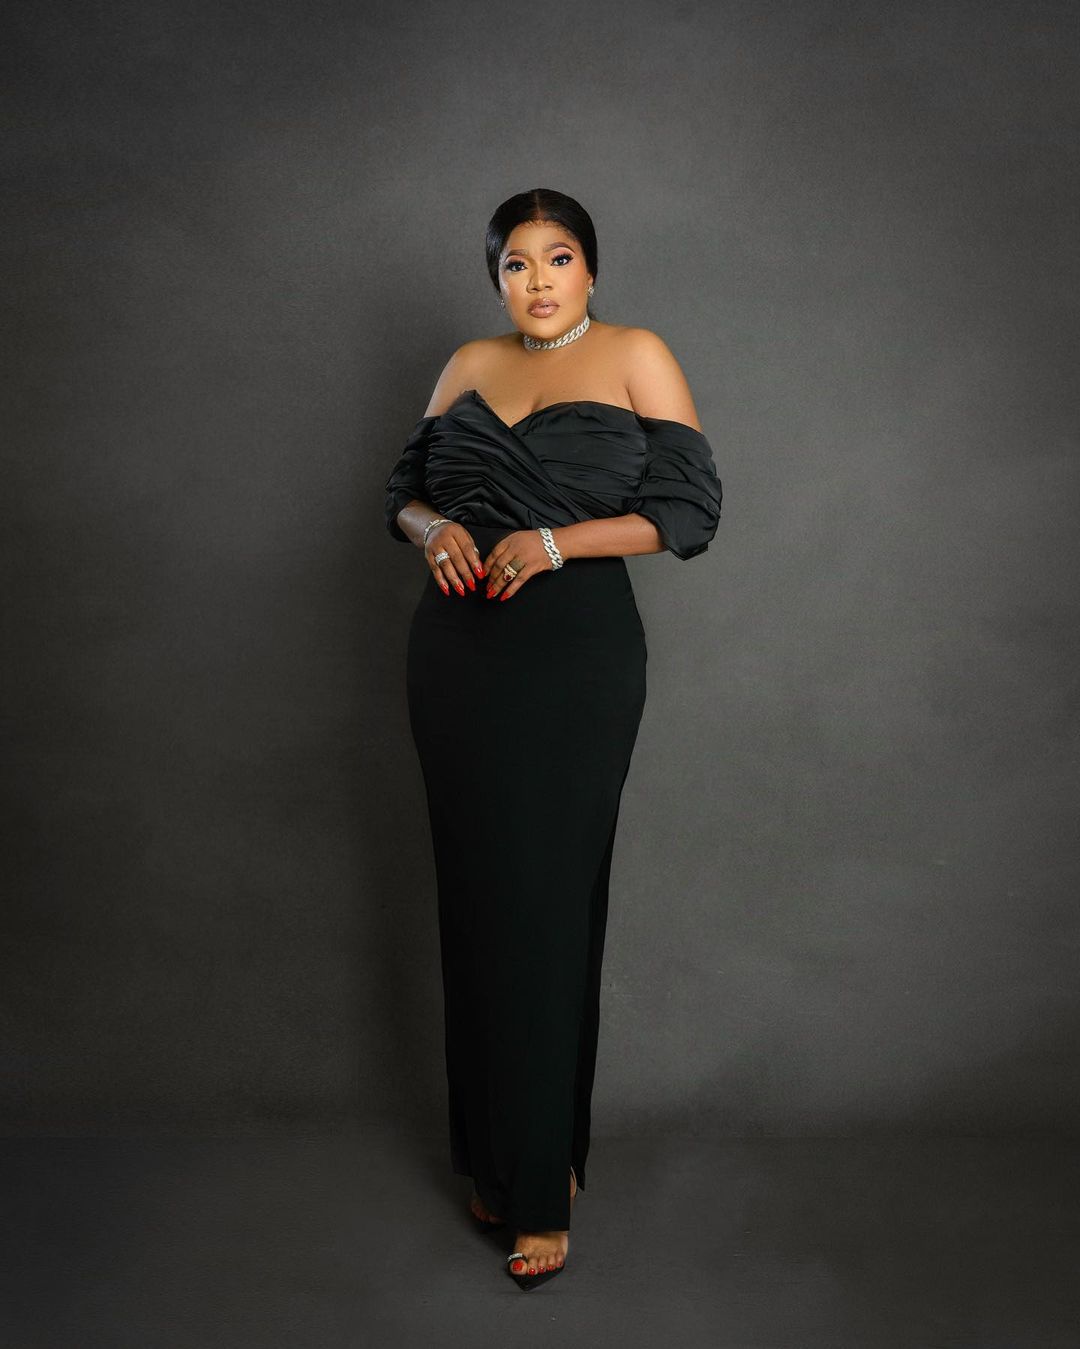 Toyin Abraham revealed why she changed her name 